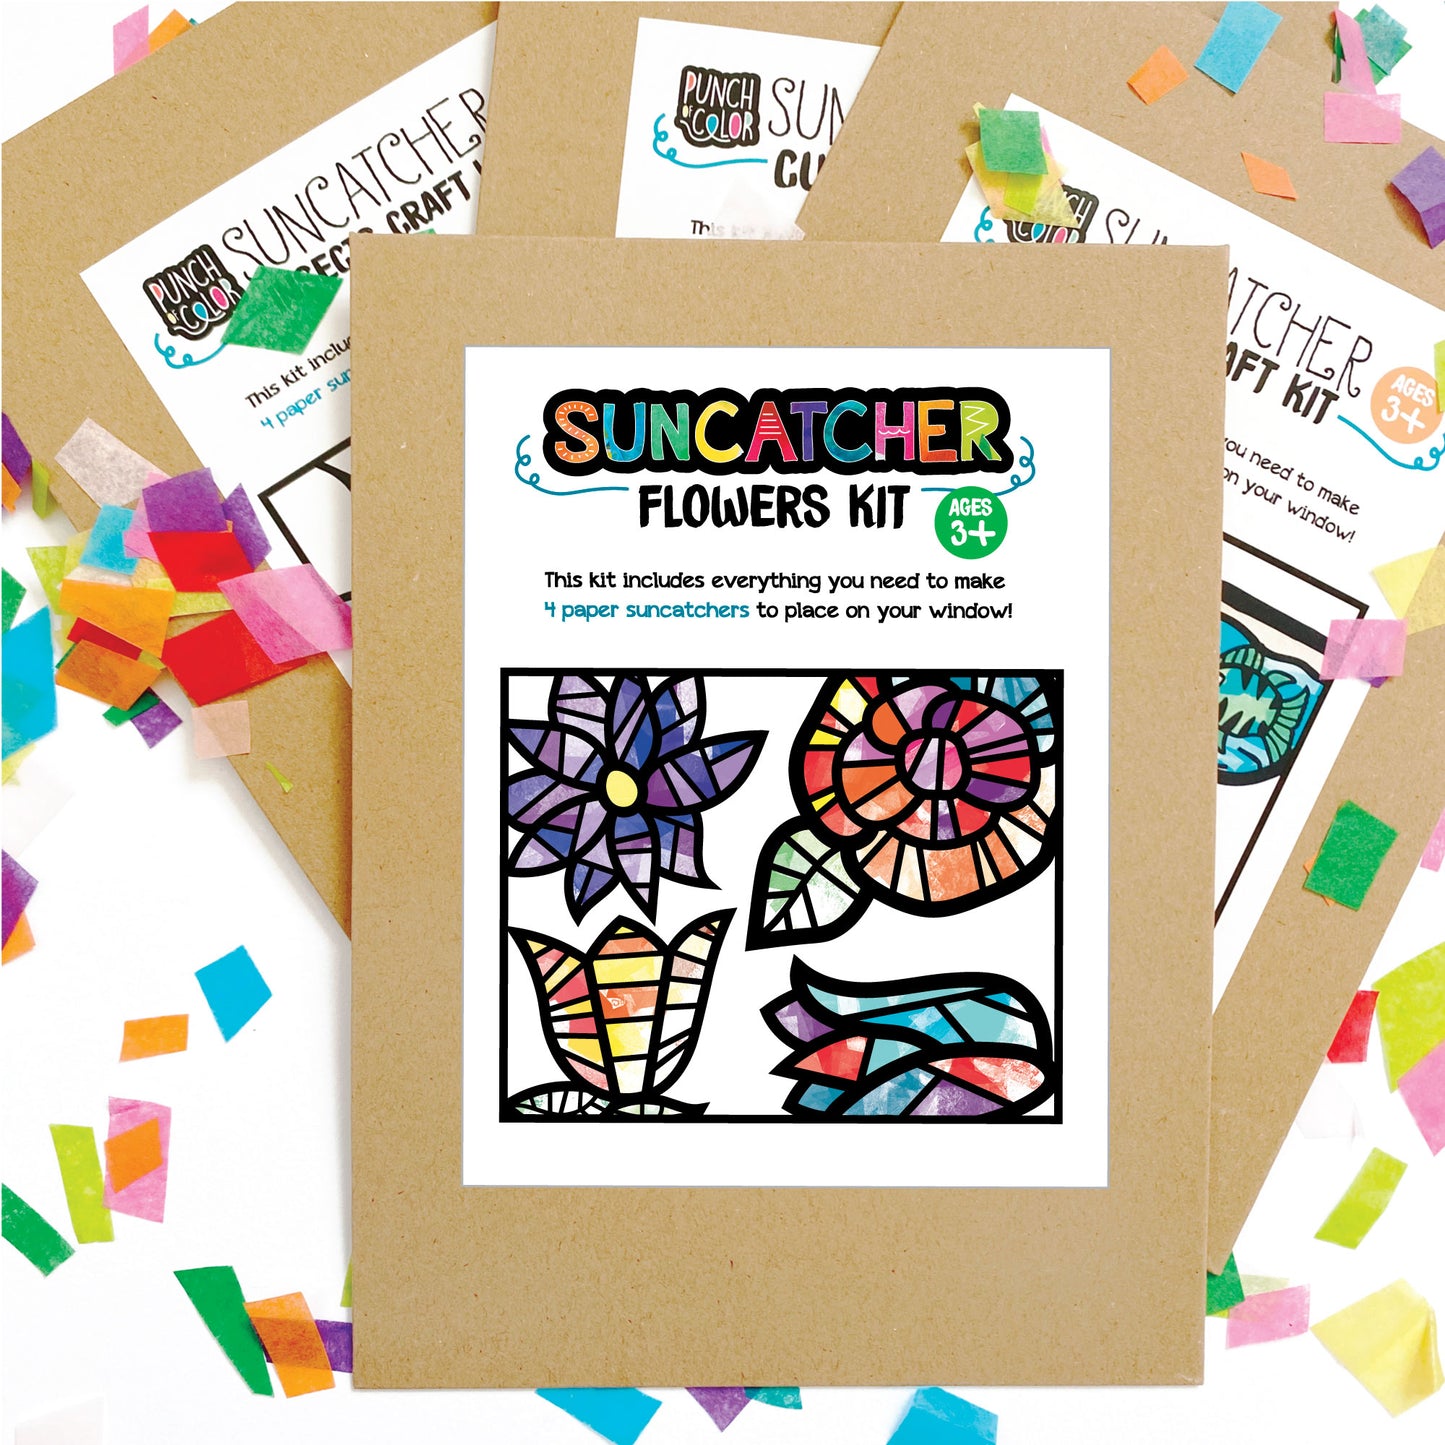 Flowers suncatcher arts and crafts kit, a mess-free paper based activity for toddlers and kids.